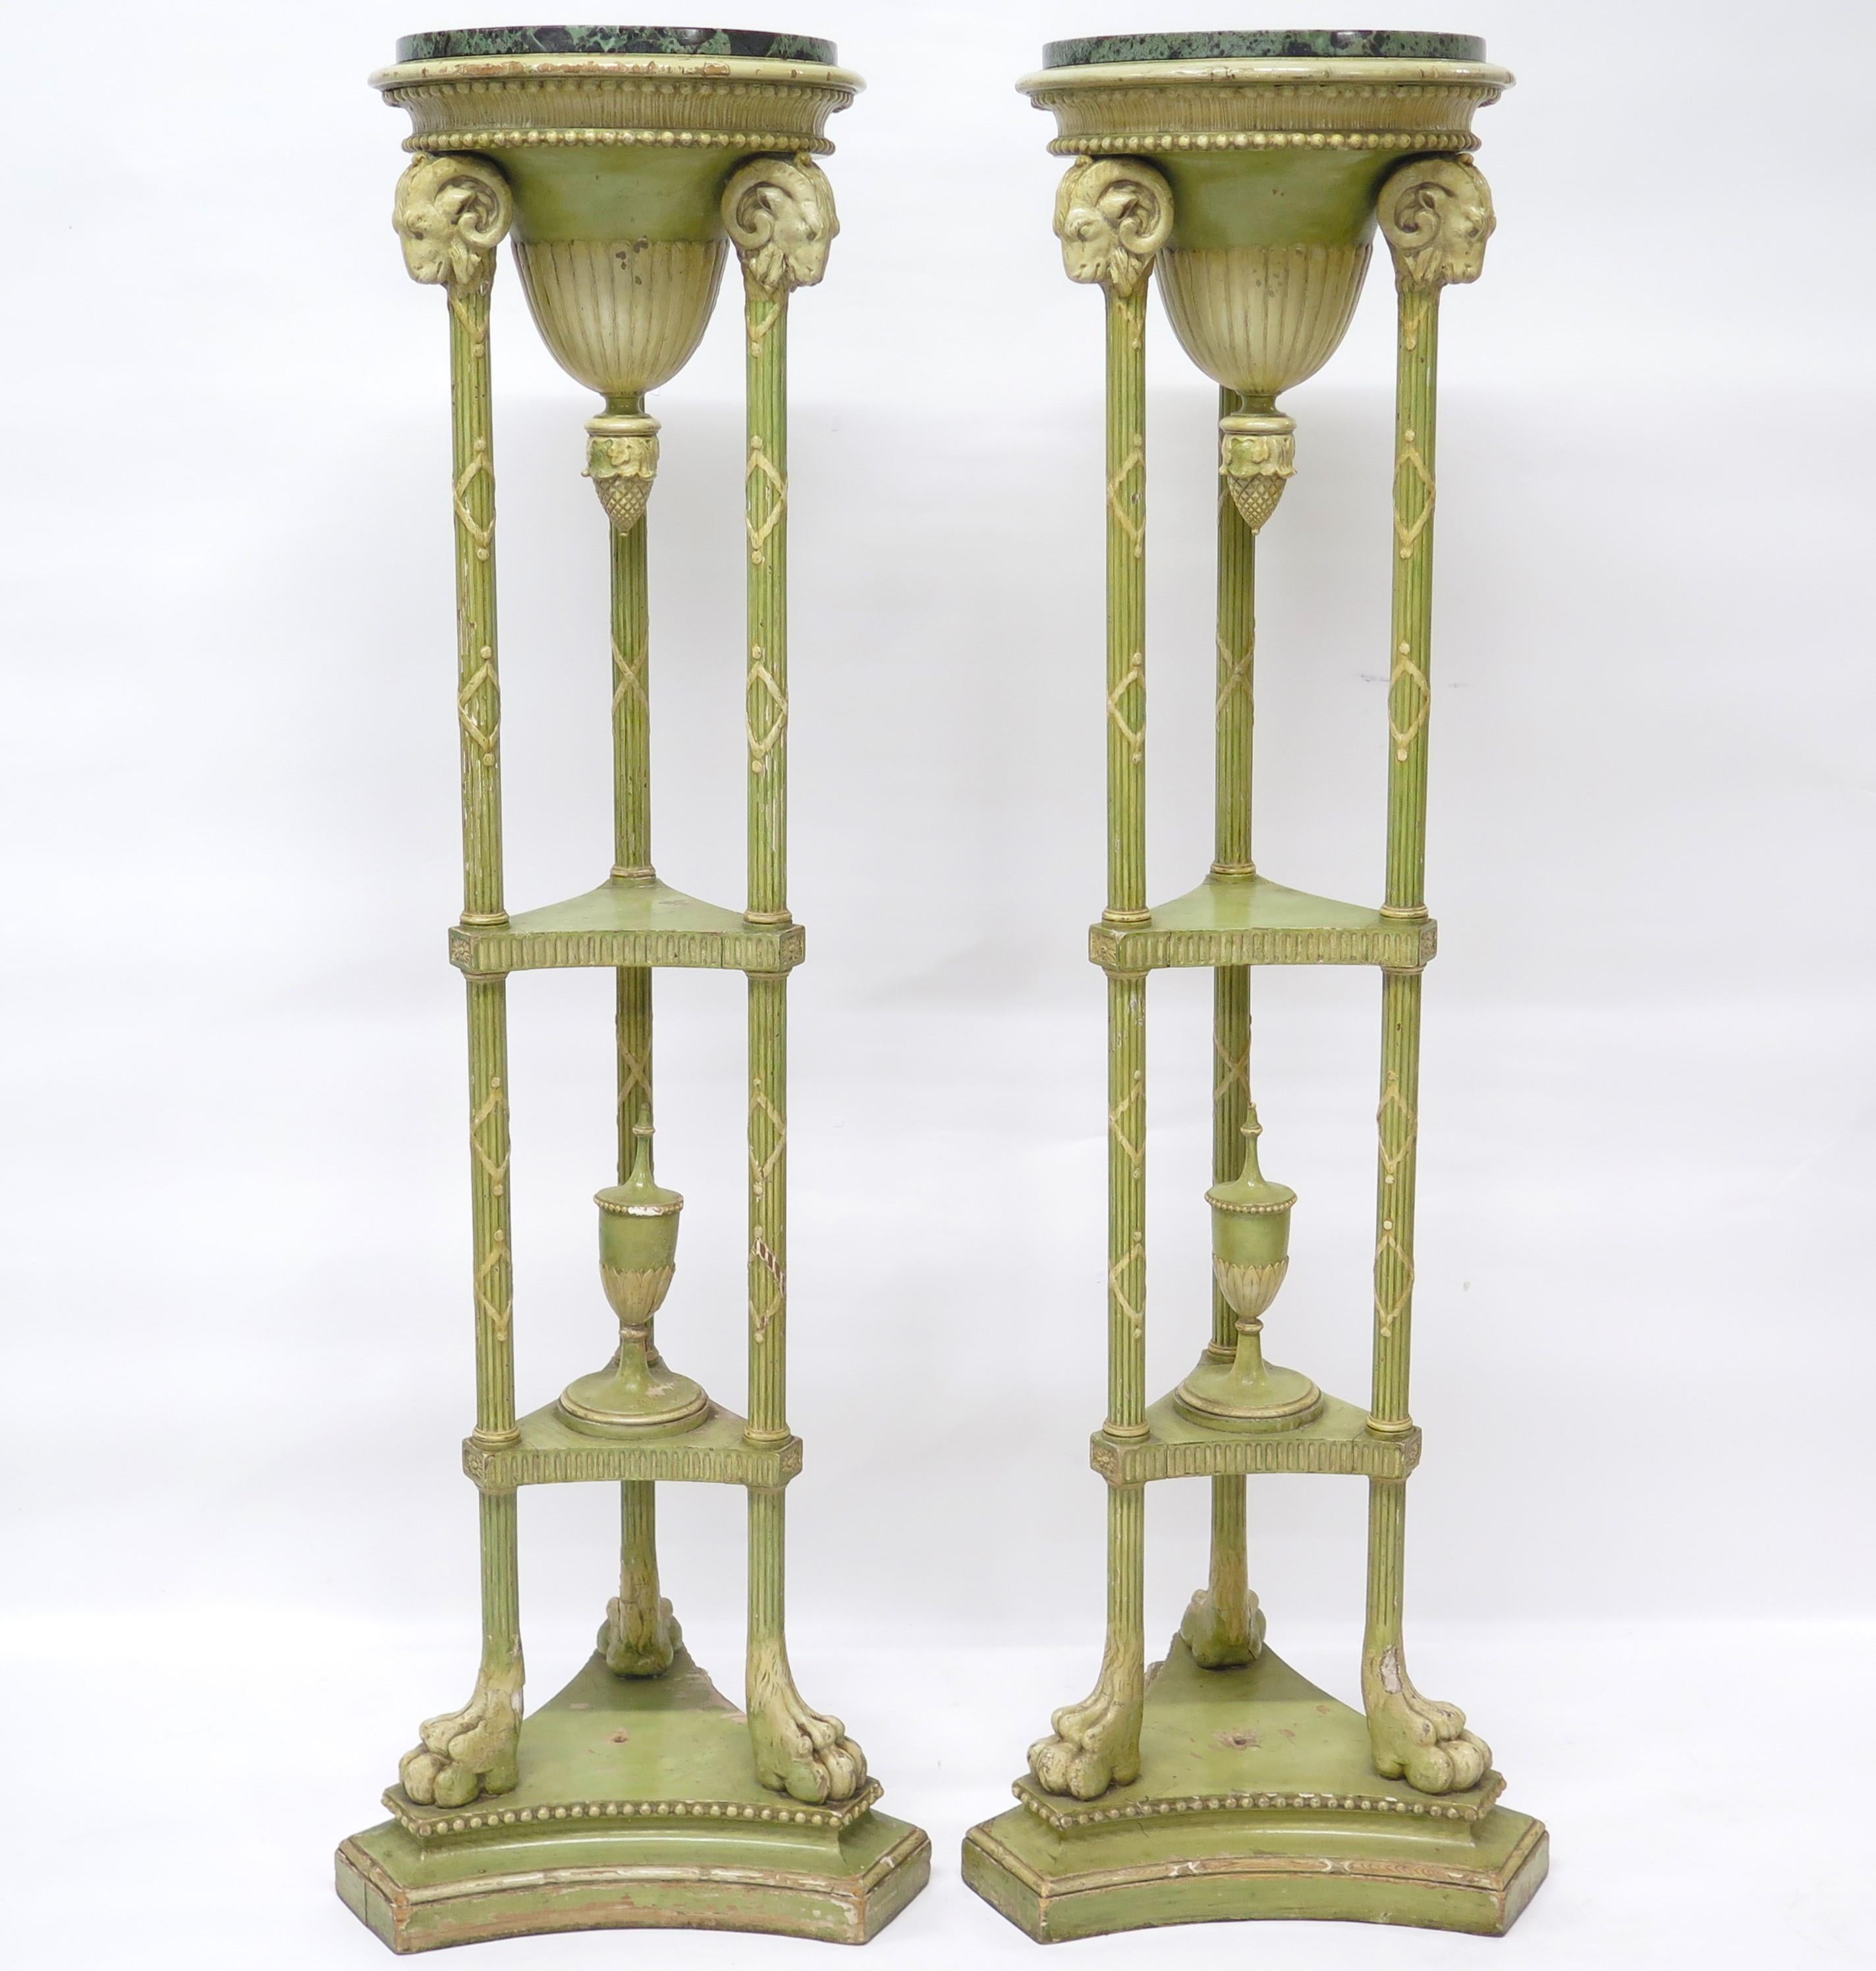 a handsome, tall, slender, elegant pair of Adam-style painted (greenish) candle stands (or plant stands) supported by three columns with lion's paw feet and ram's heads, green grey and black round marble tops. England, Edwardian, circa 1910